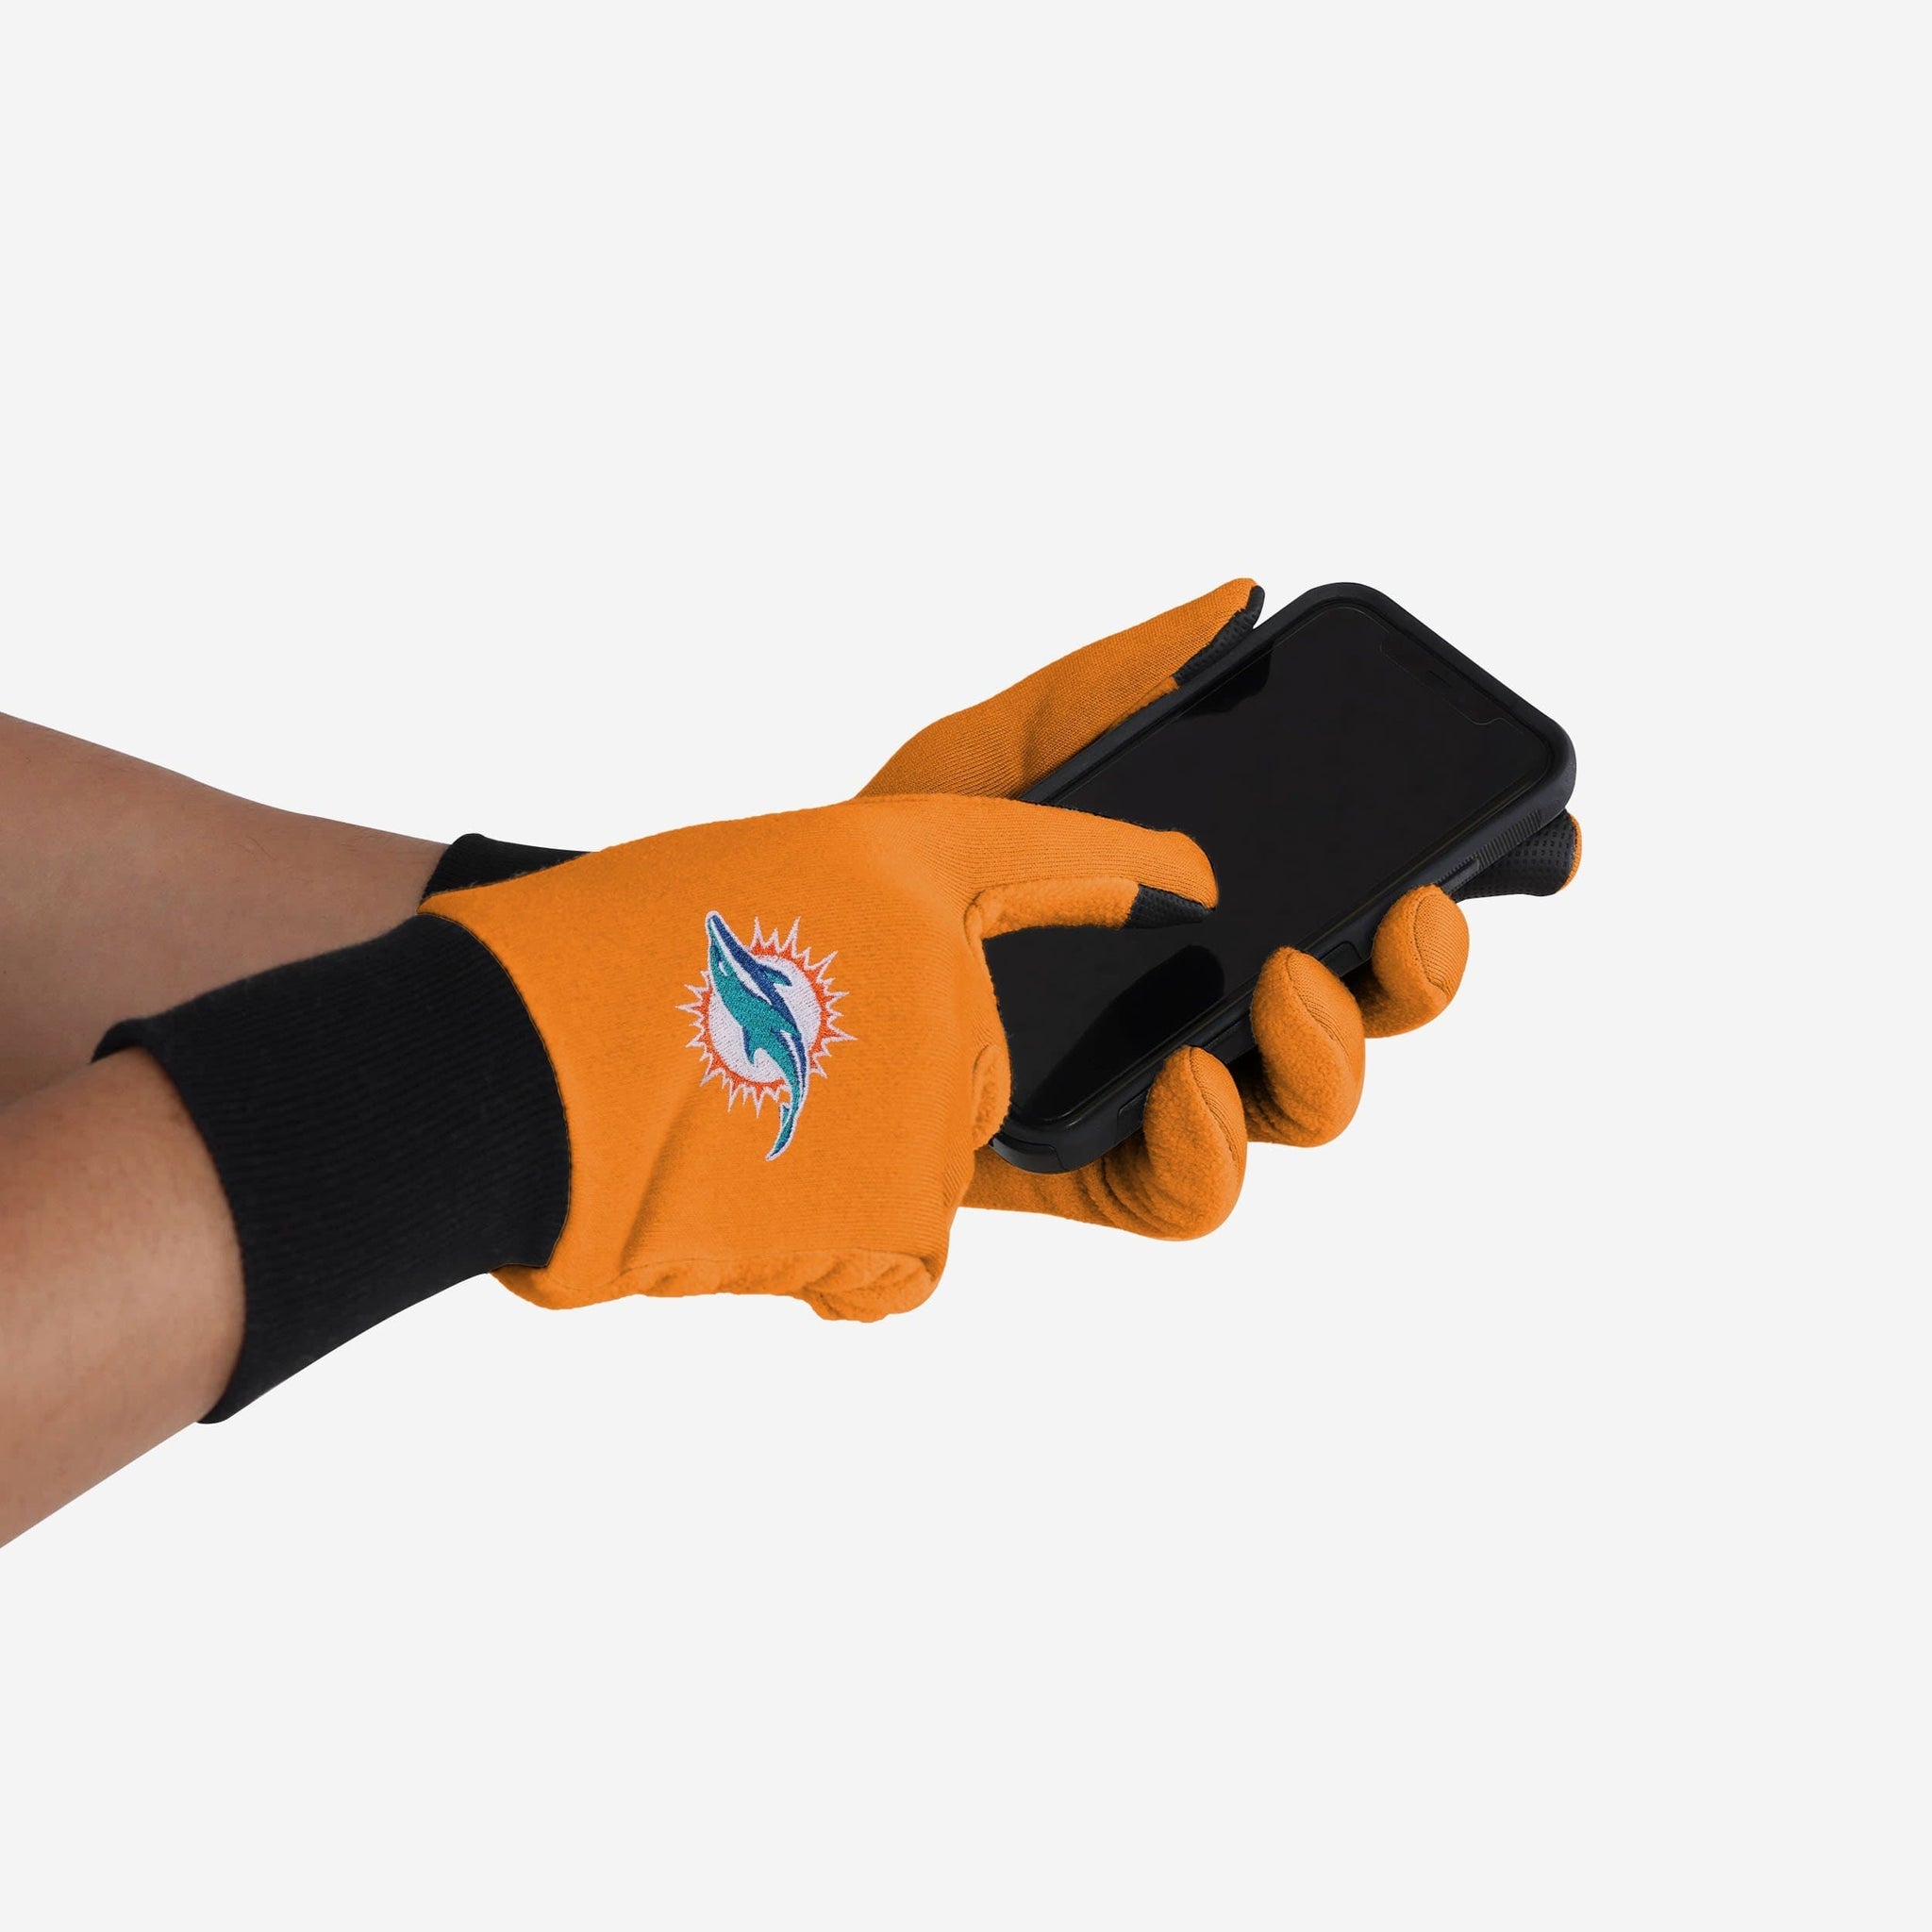 Miami Dolphins Team Texting Gloves